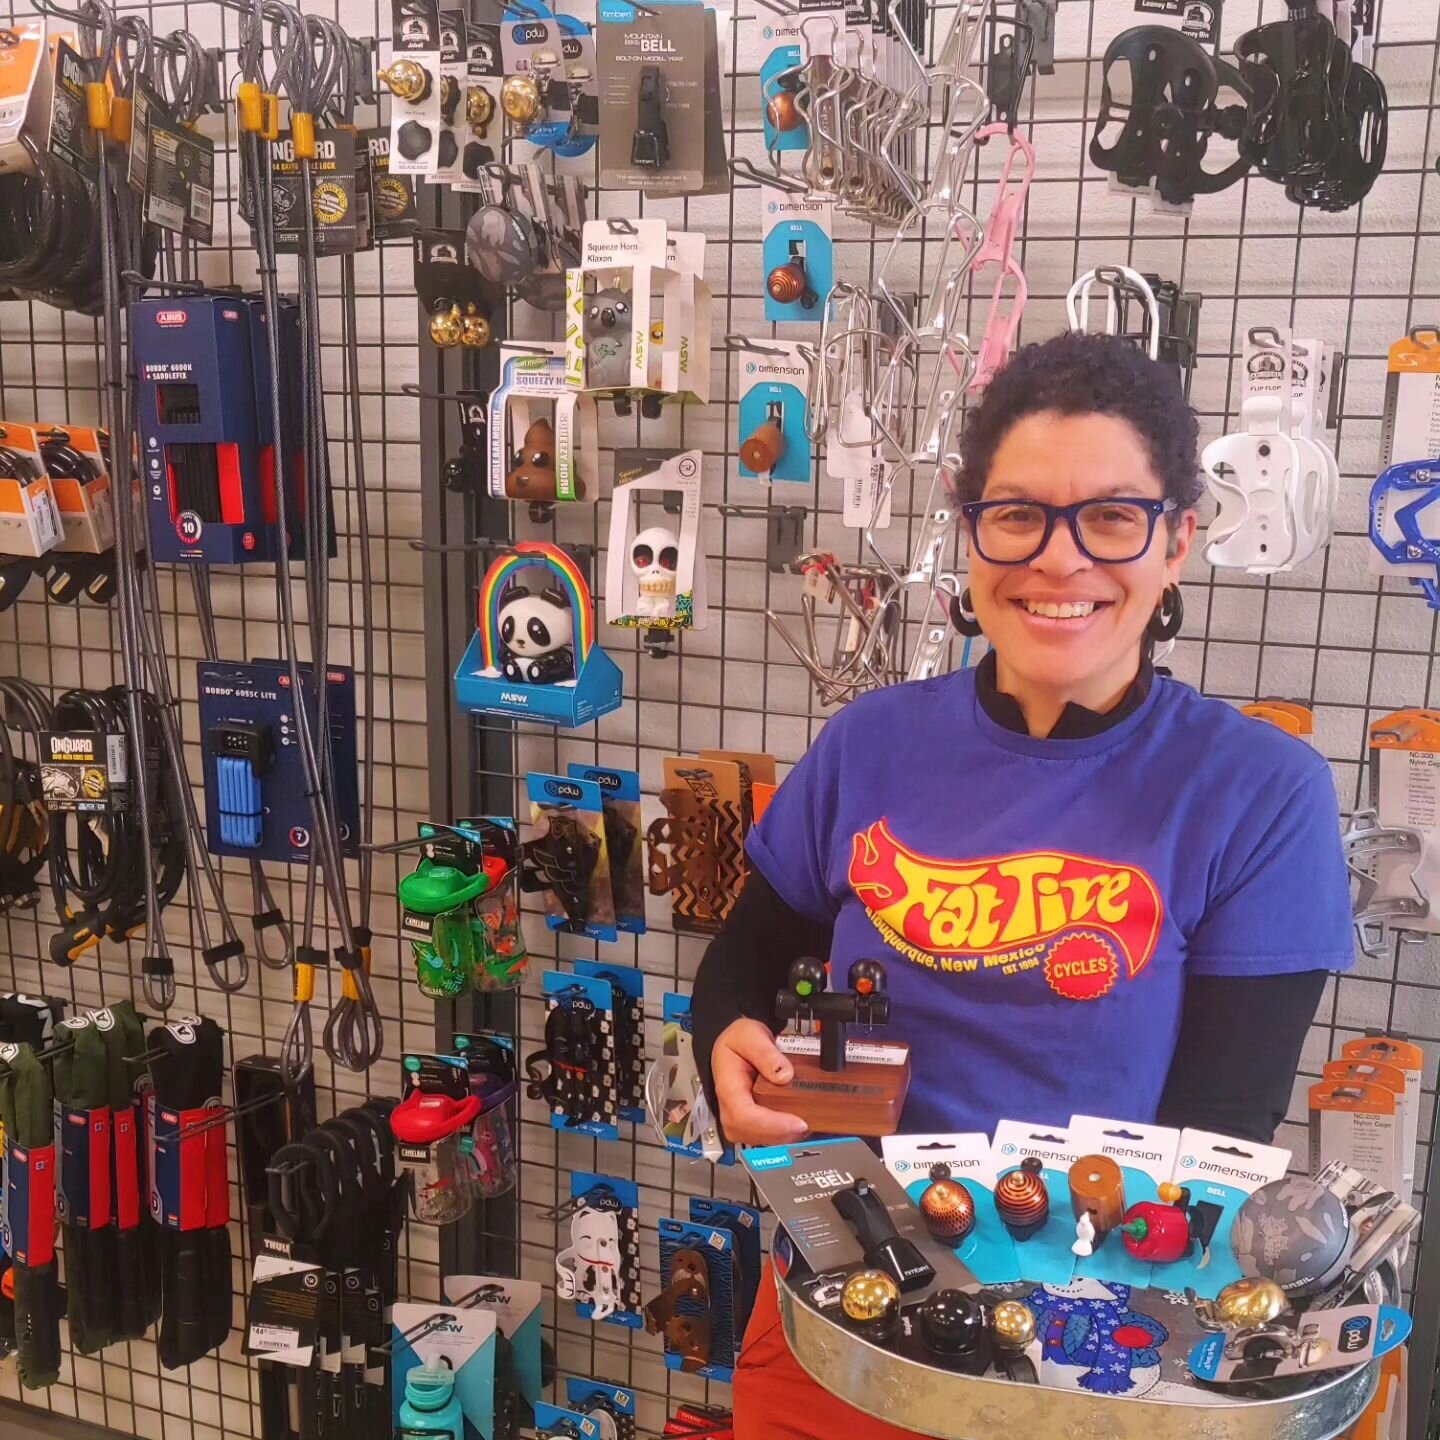 Gift Recommendations from Fat Tire Staff - Episode 9: Ali

We asked our staff what they&rsquo;d like to give and what they&rsquo;d like to receive this holiday season:

Ali, our Retail Coordinator, thinks bells make great gifts and help keep cyclists